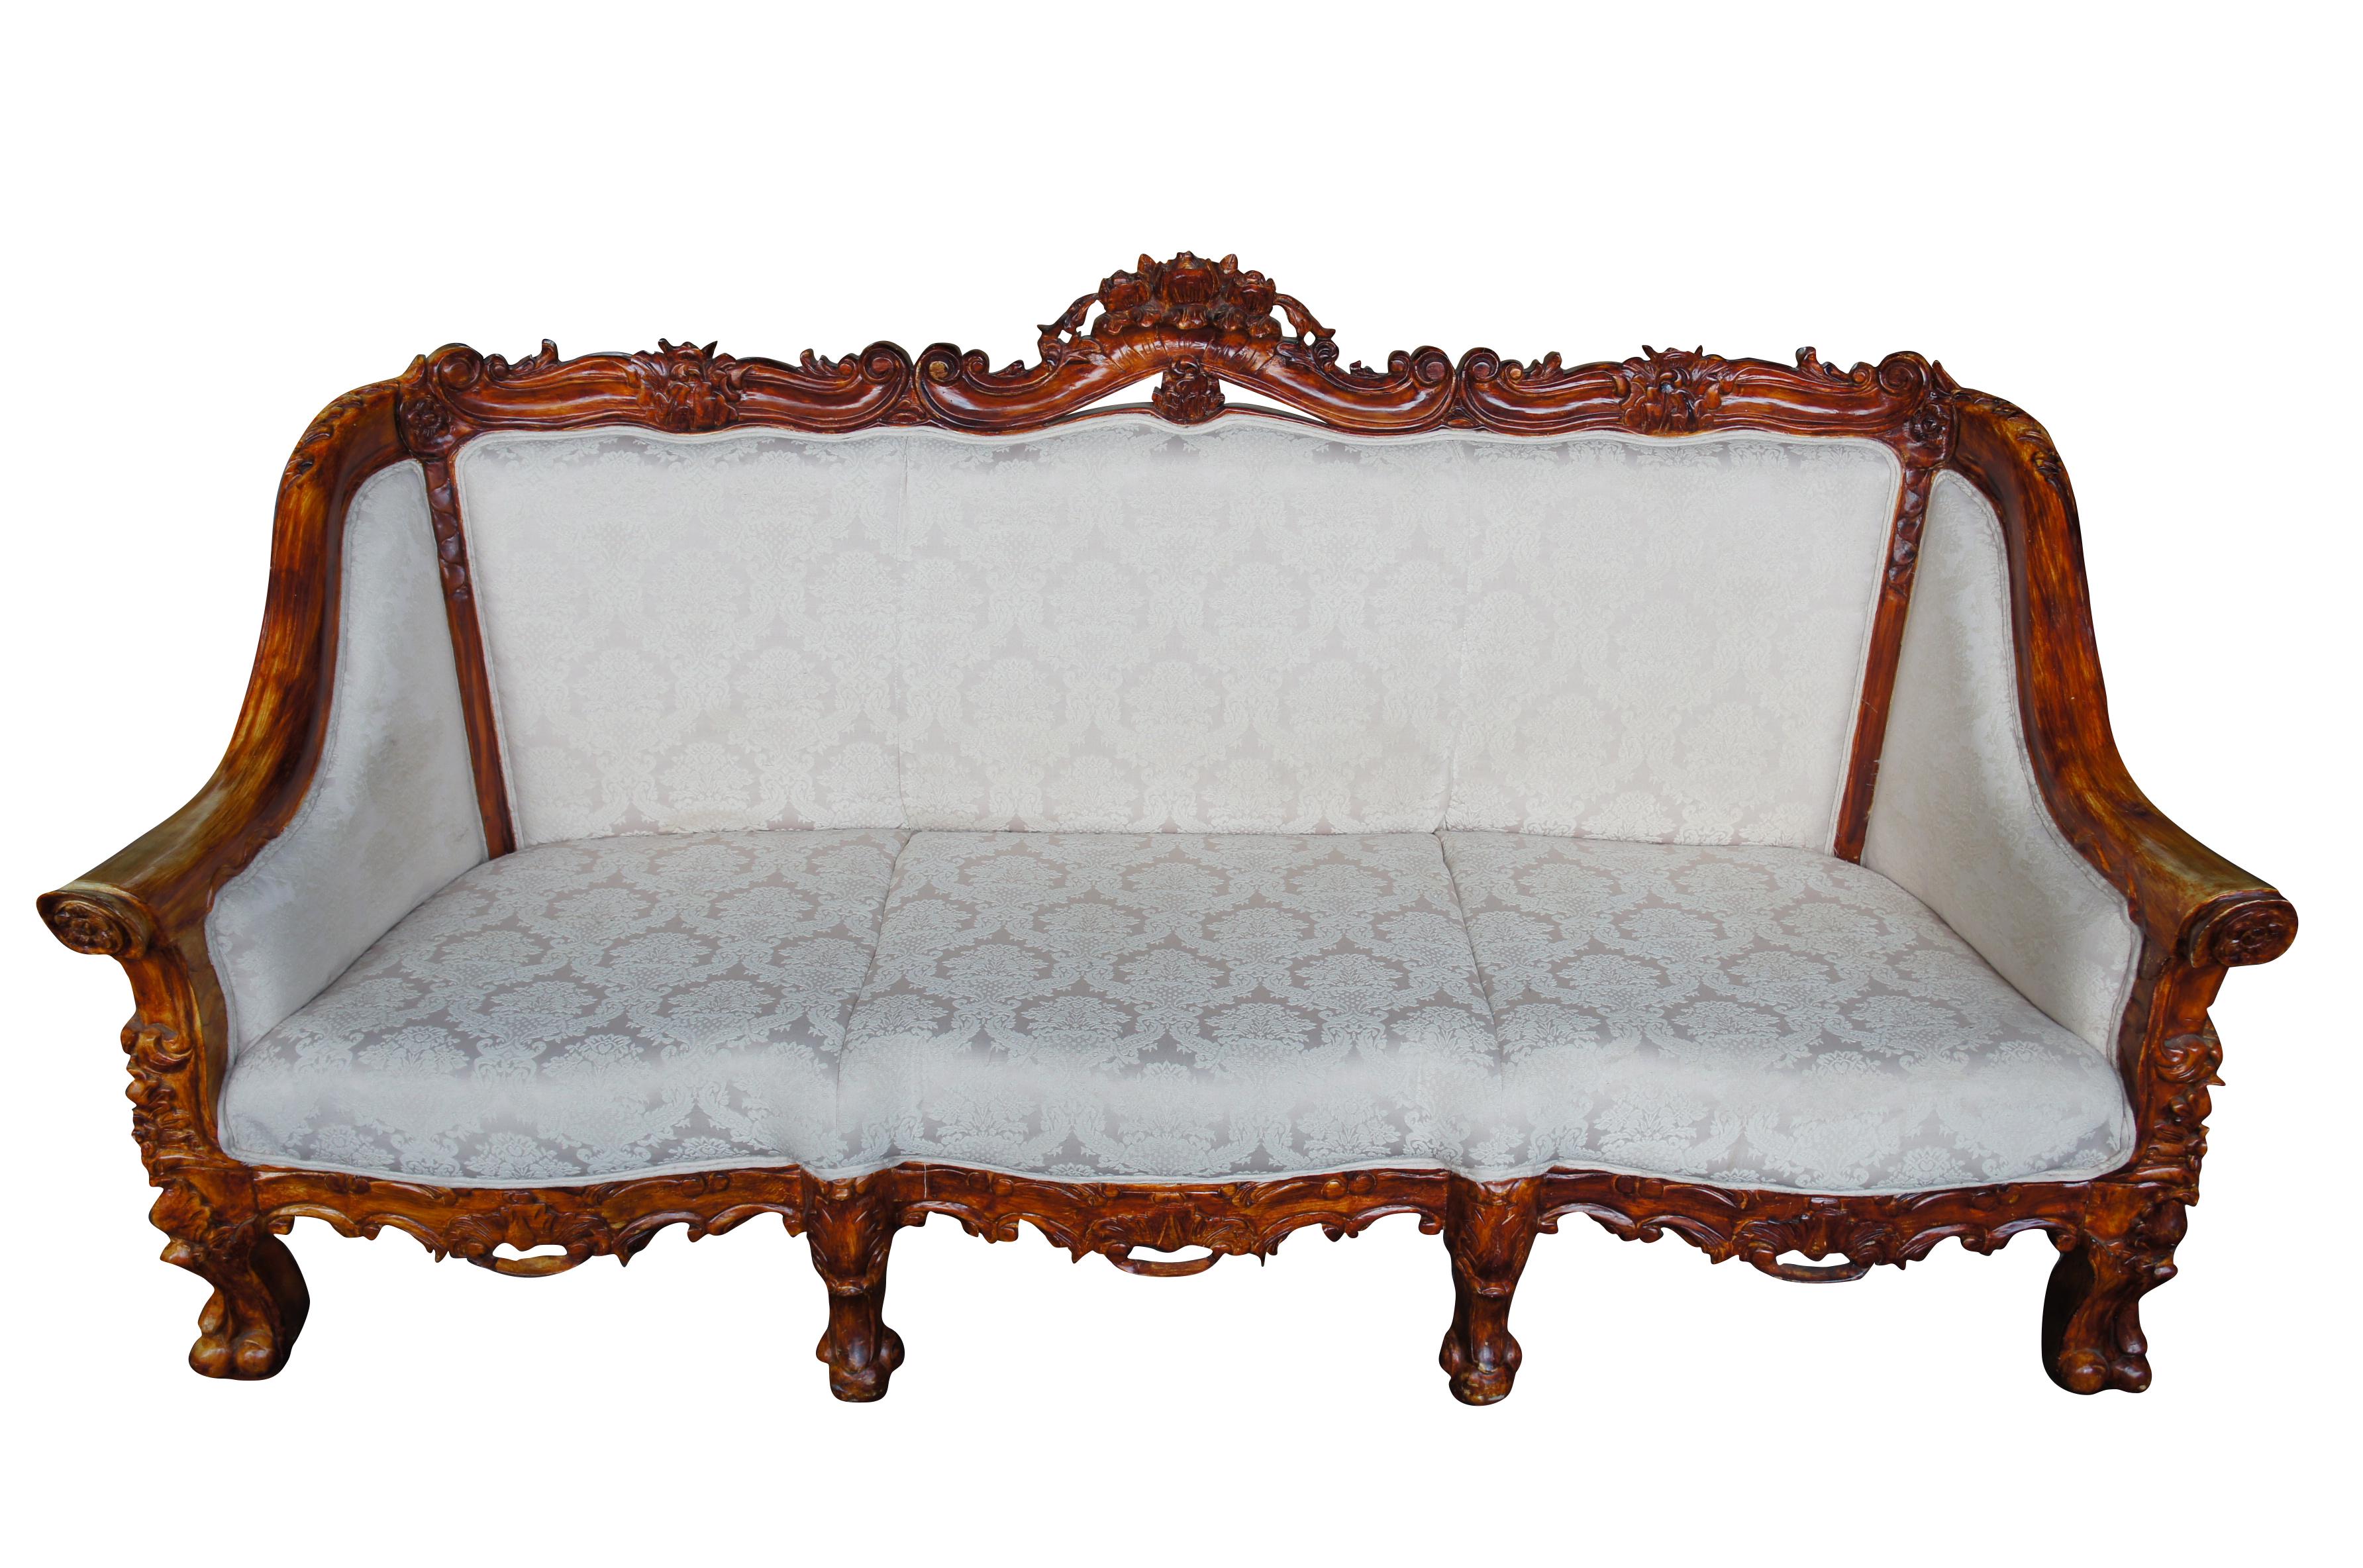 Antiqued baroque rococo high relief carved settee continental sofa brocade seat

Exceptional baroque rococo designed sofa. Features high relief scalloped floral carvings. Upholstered in a brocade fabric. The perfect statement for any